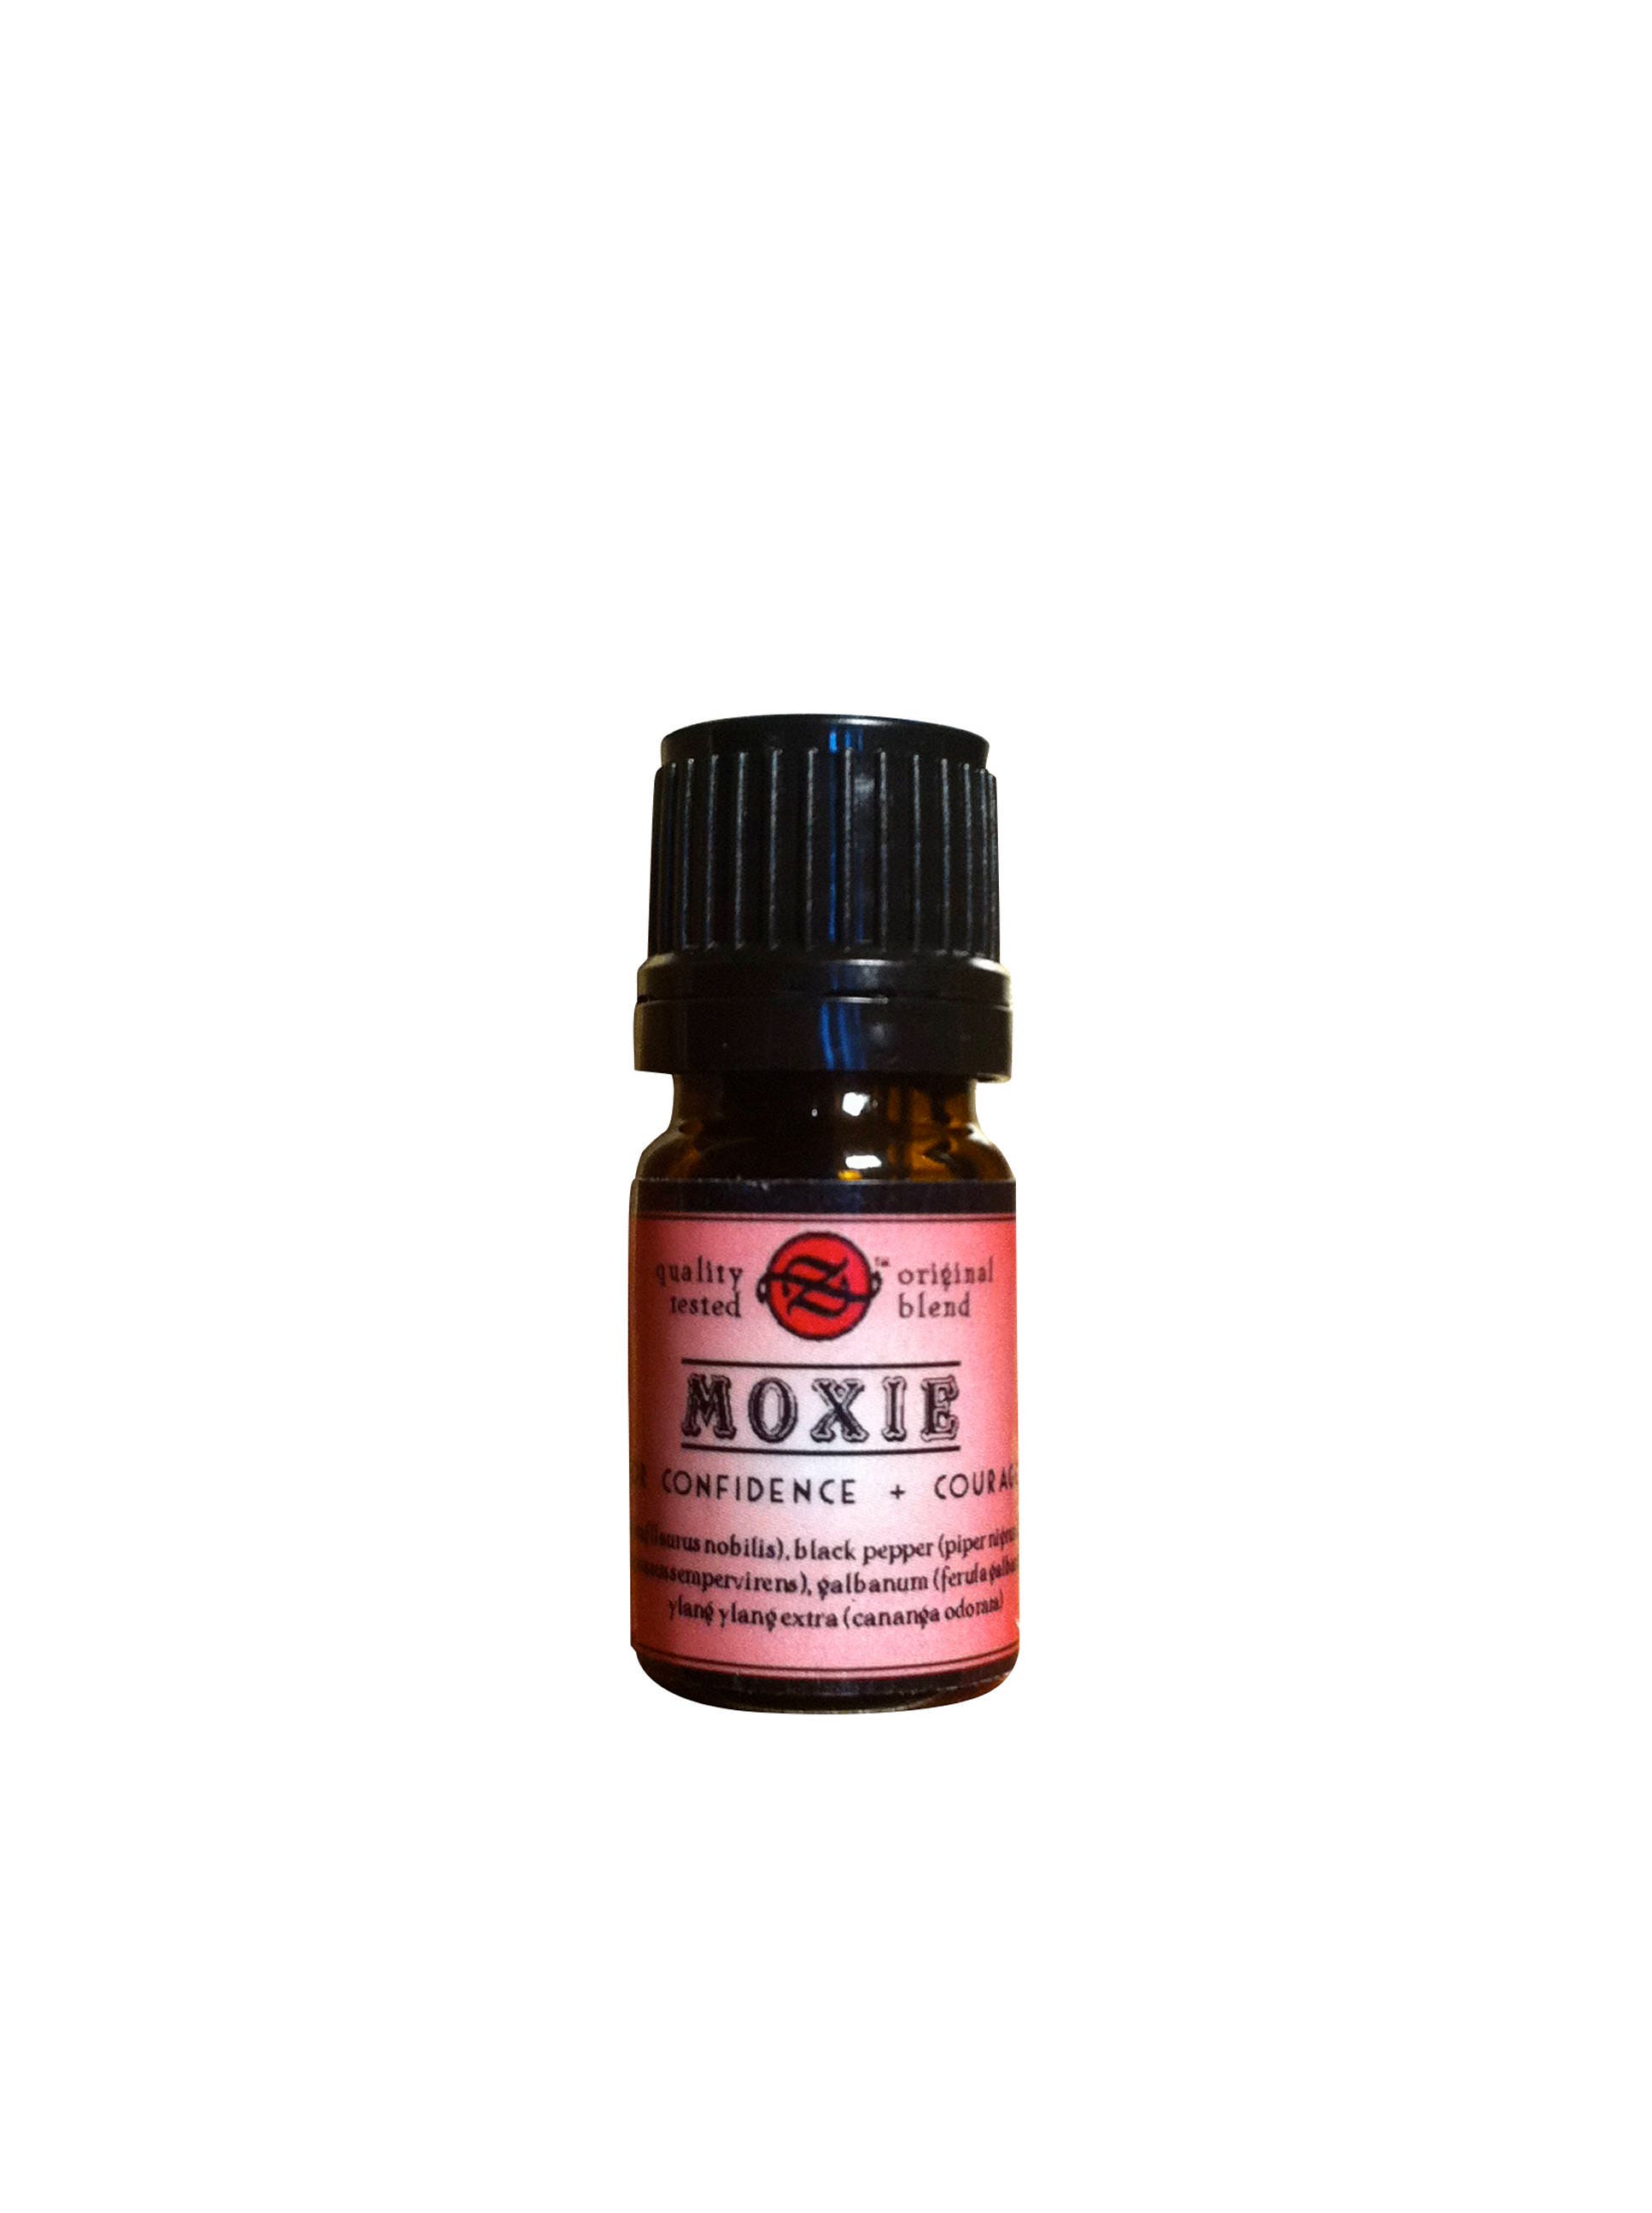 Moxie Essential Oil Blend For Confidence & Courage